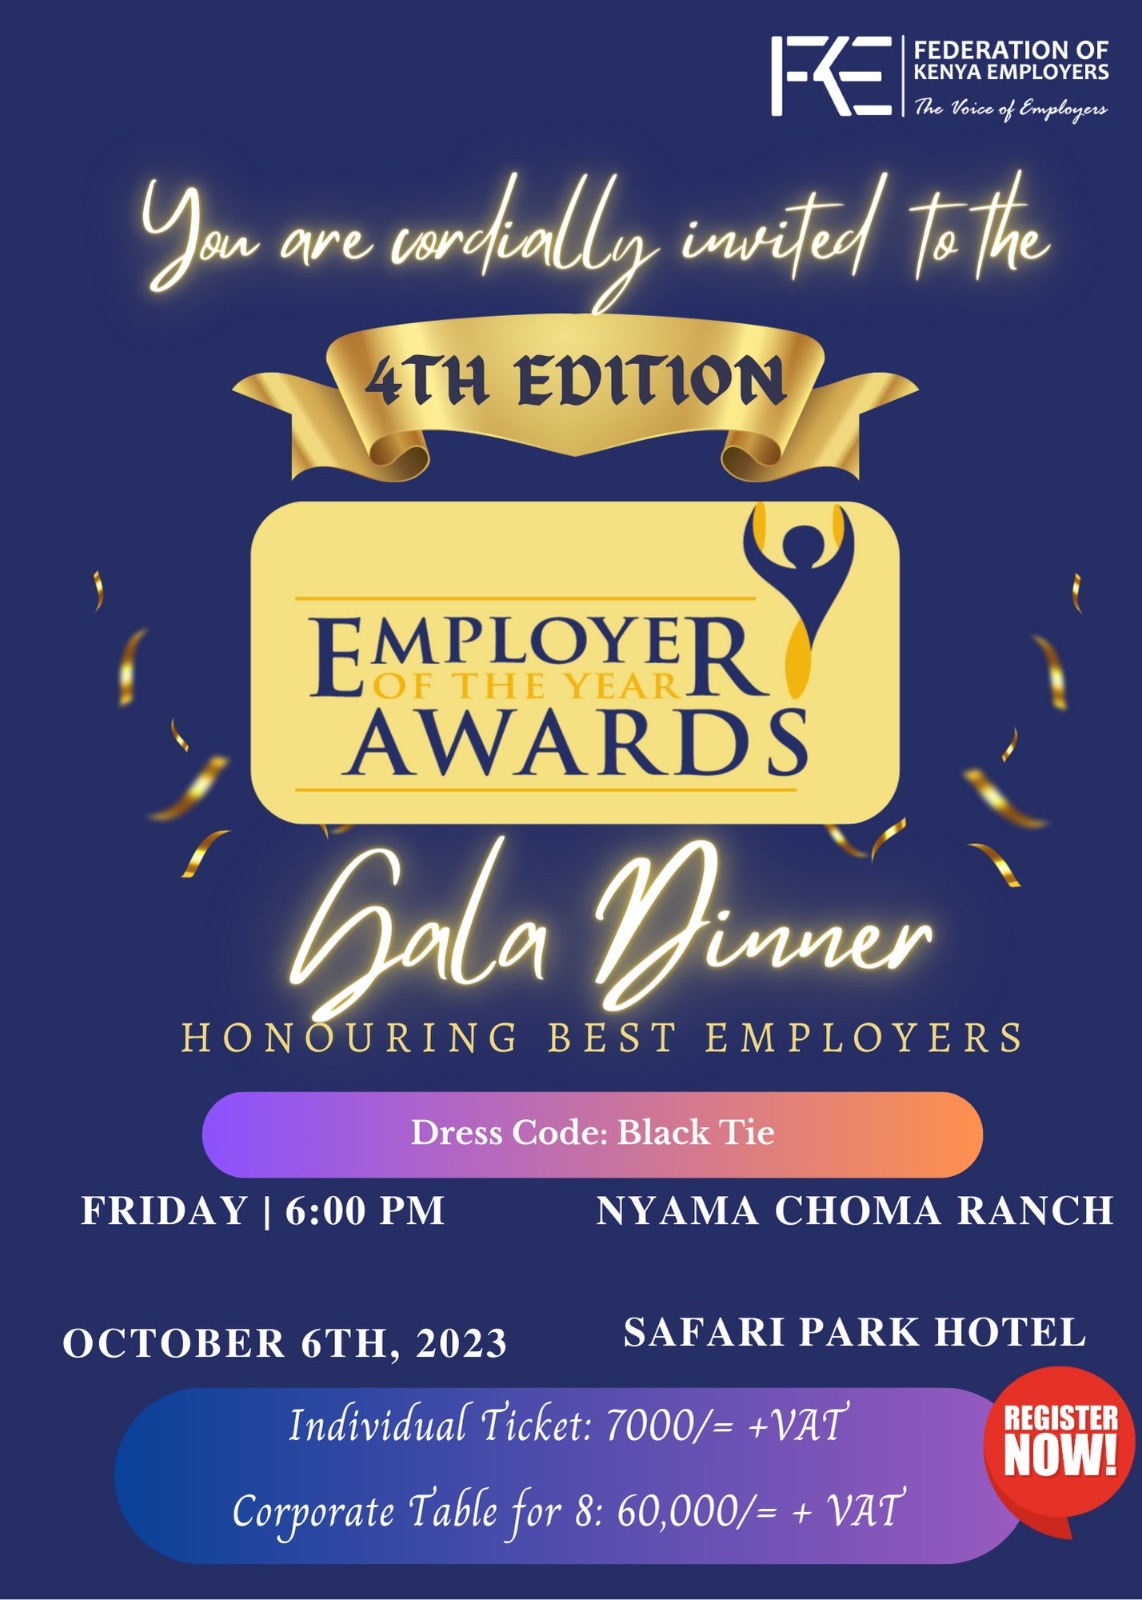 Invitation to the Employer of the Year Awards Gala Dinner 2023